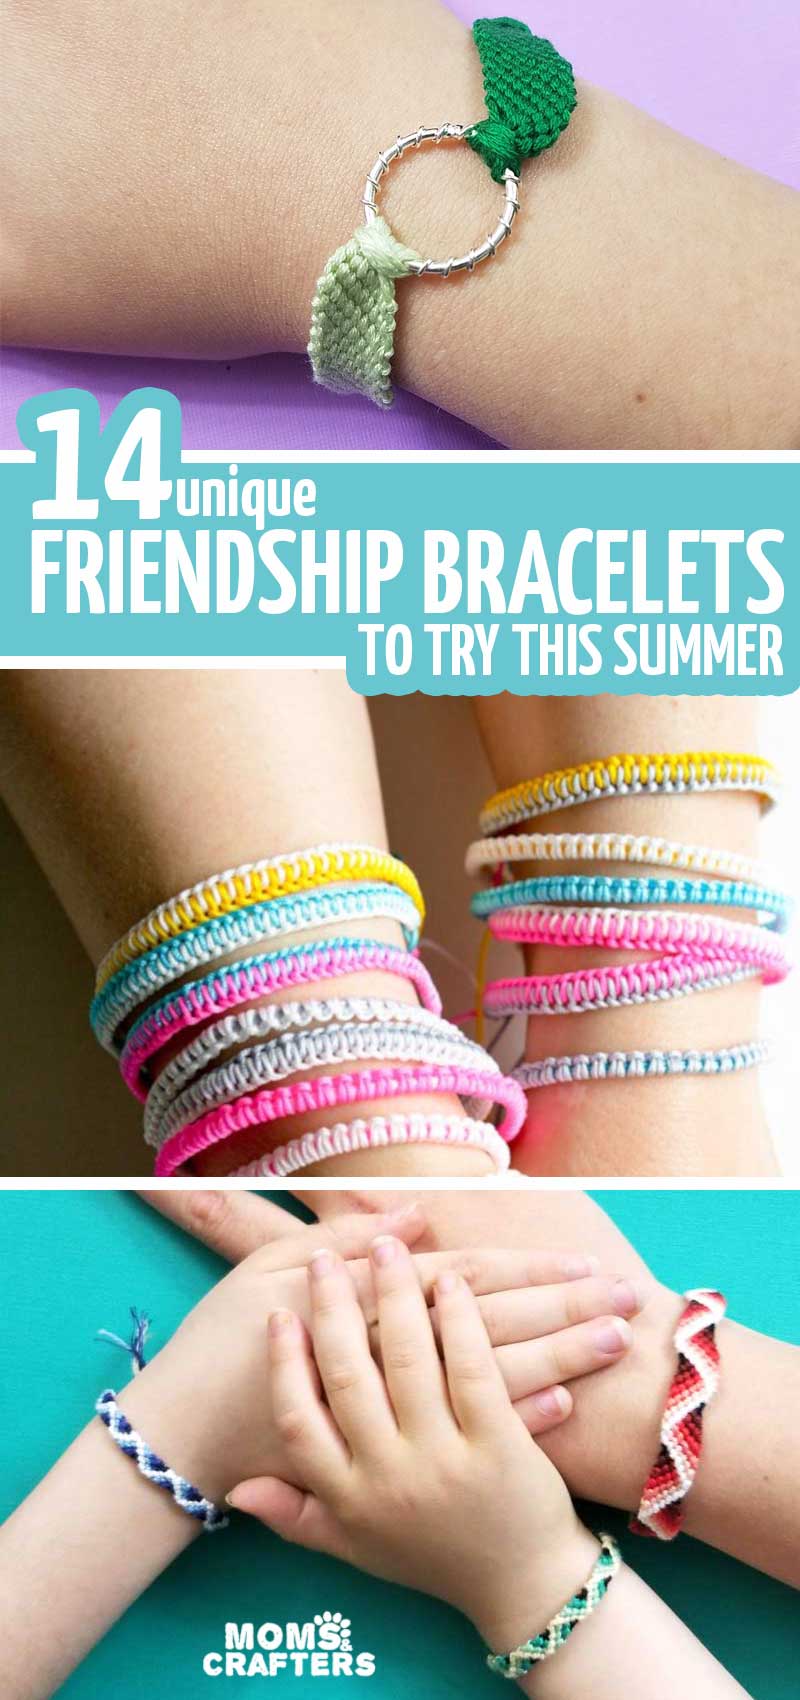 How To Make Adorable Loopdedoo Friendship Bracelets In Just A Few